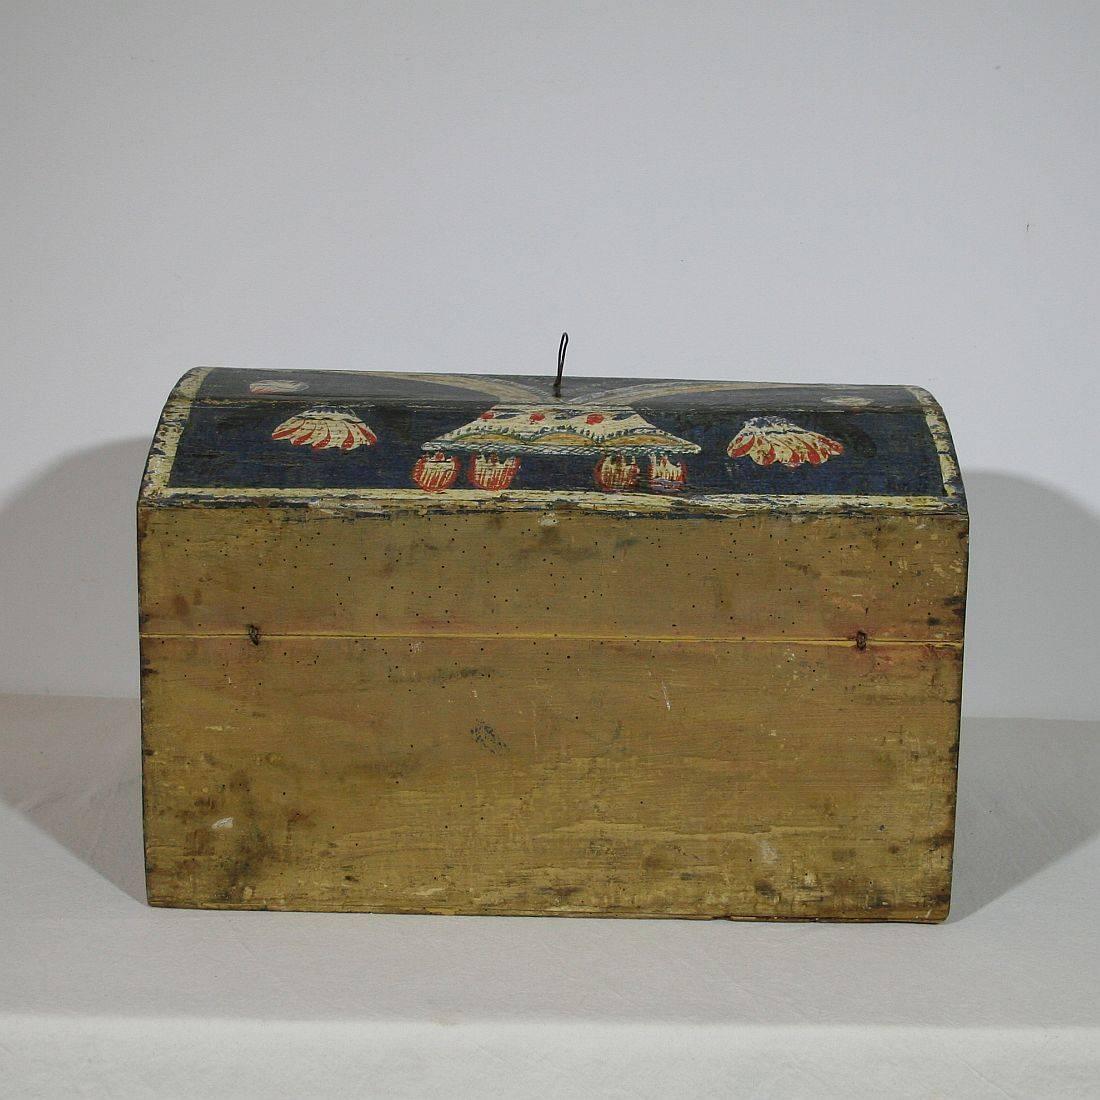 18th Century and Earlier 18th Century French Folk Art Weddingbox from Normandy with Hearts and Bird